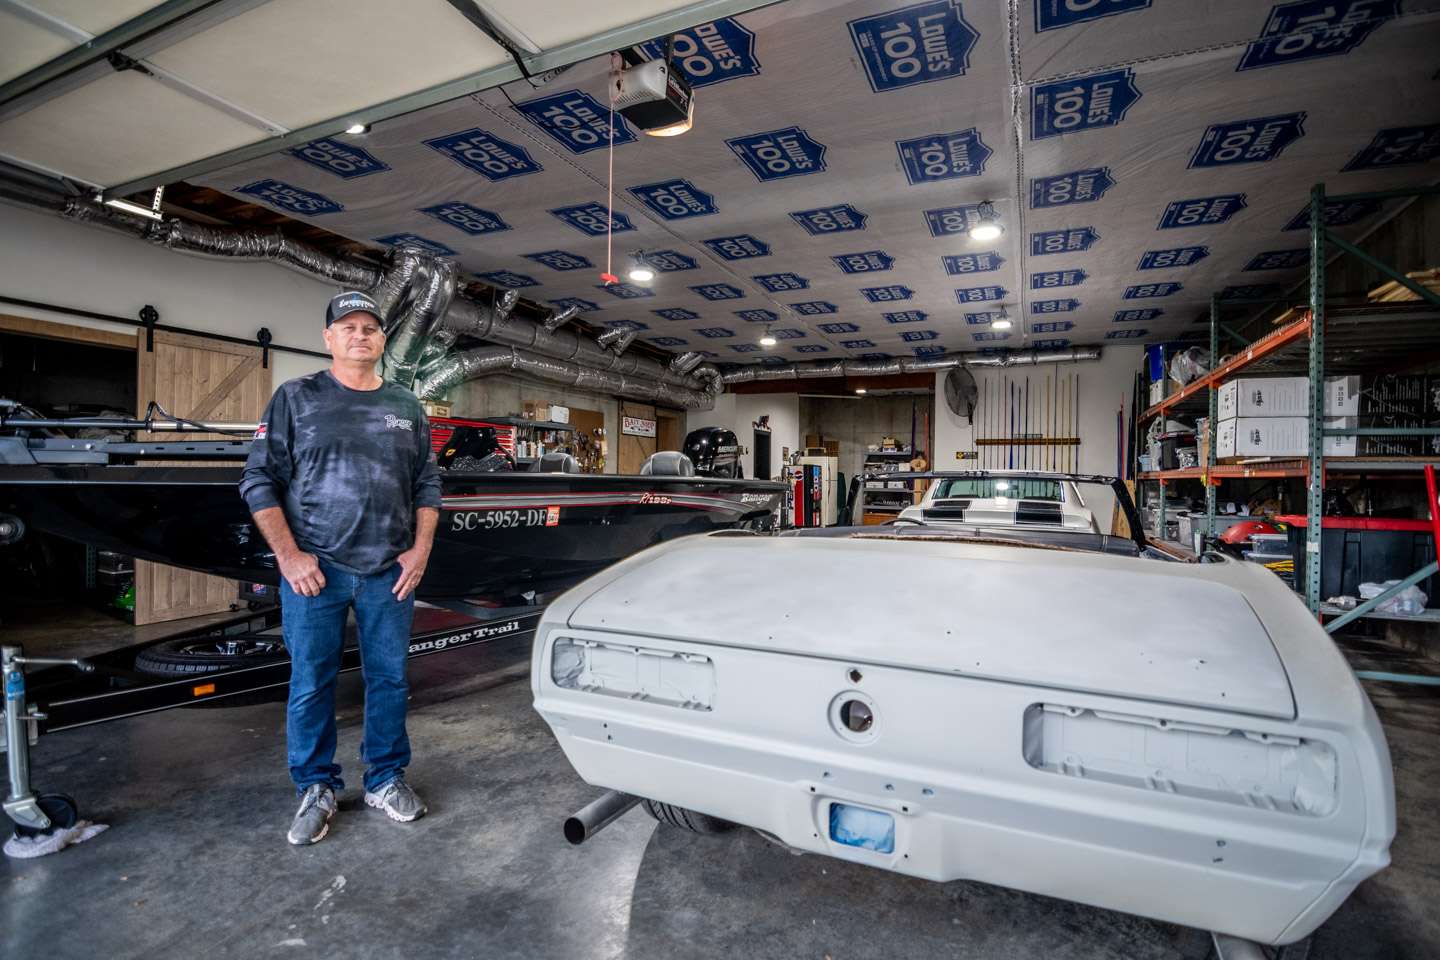 Auten, 24 years into his professional career, has laid out a basement garage full of style and projects that anyone would be happy to add to their man cave. 